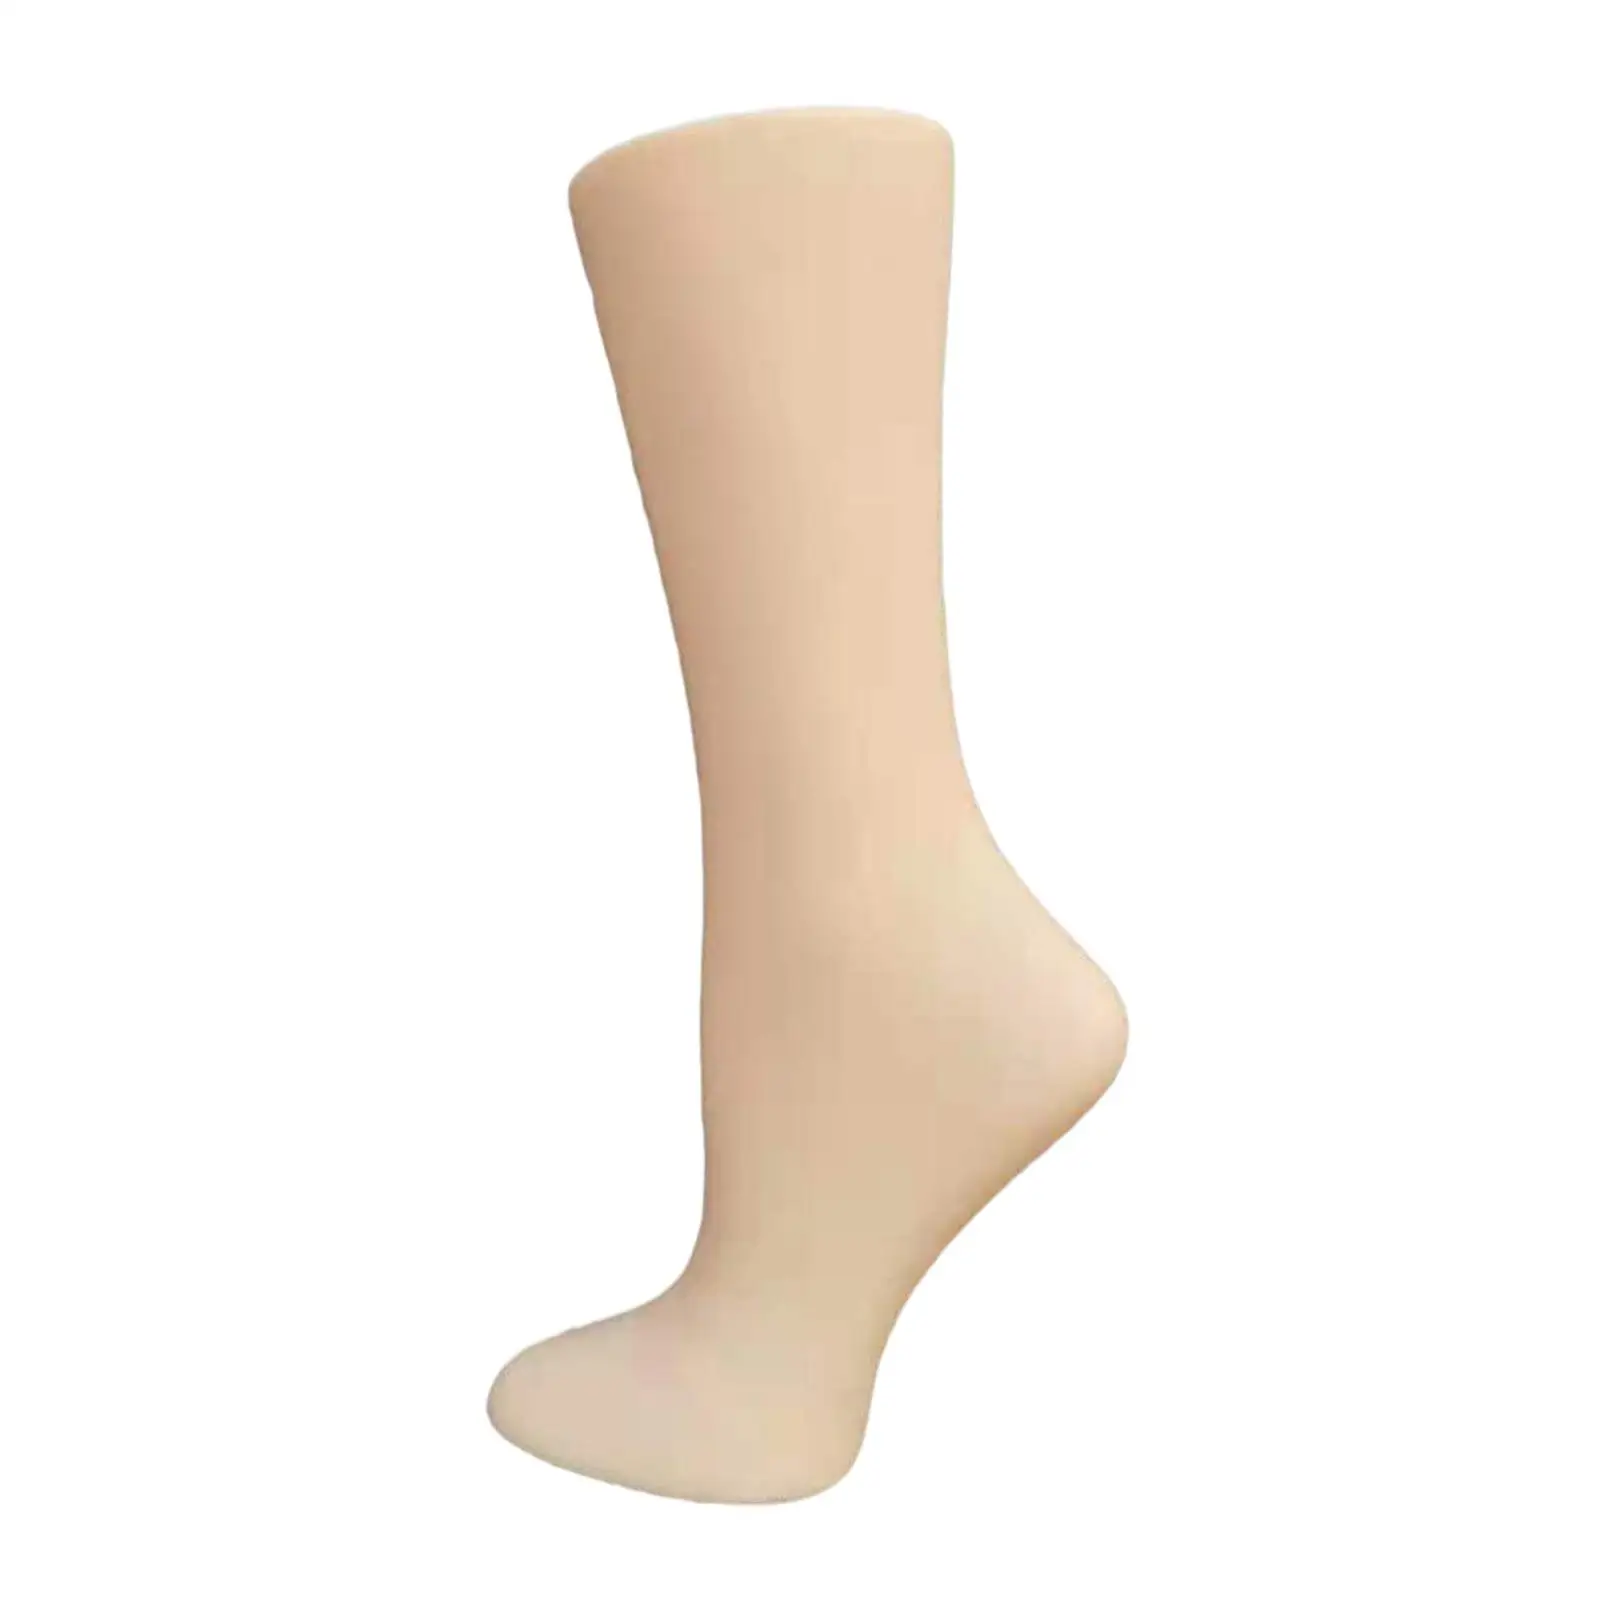 Female Display Stocking Accessories   Short Foot Adults